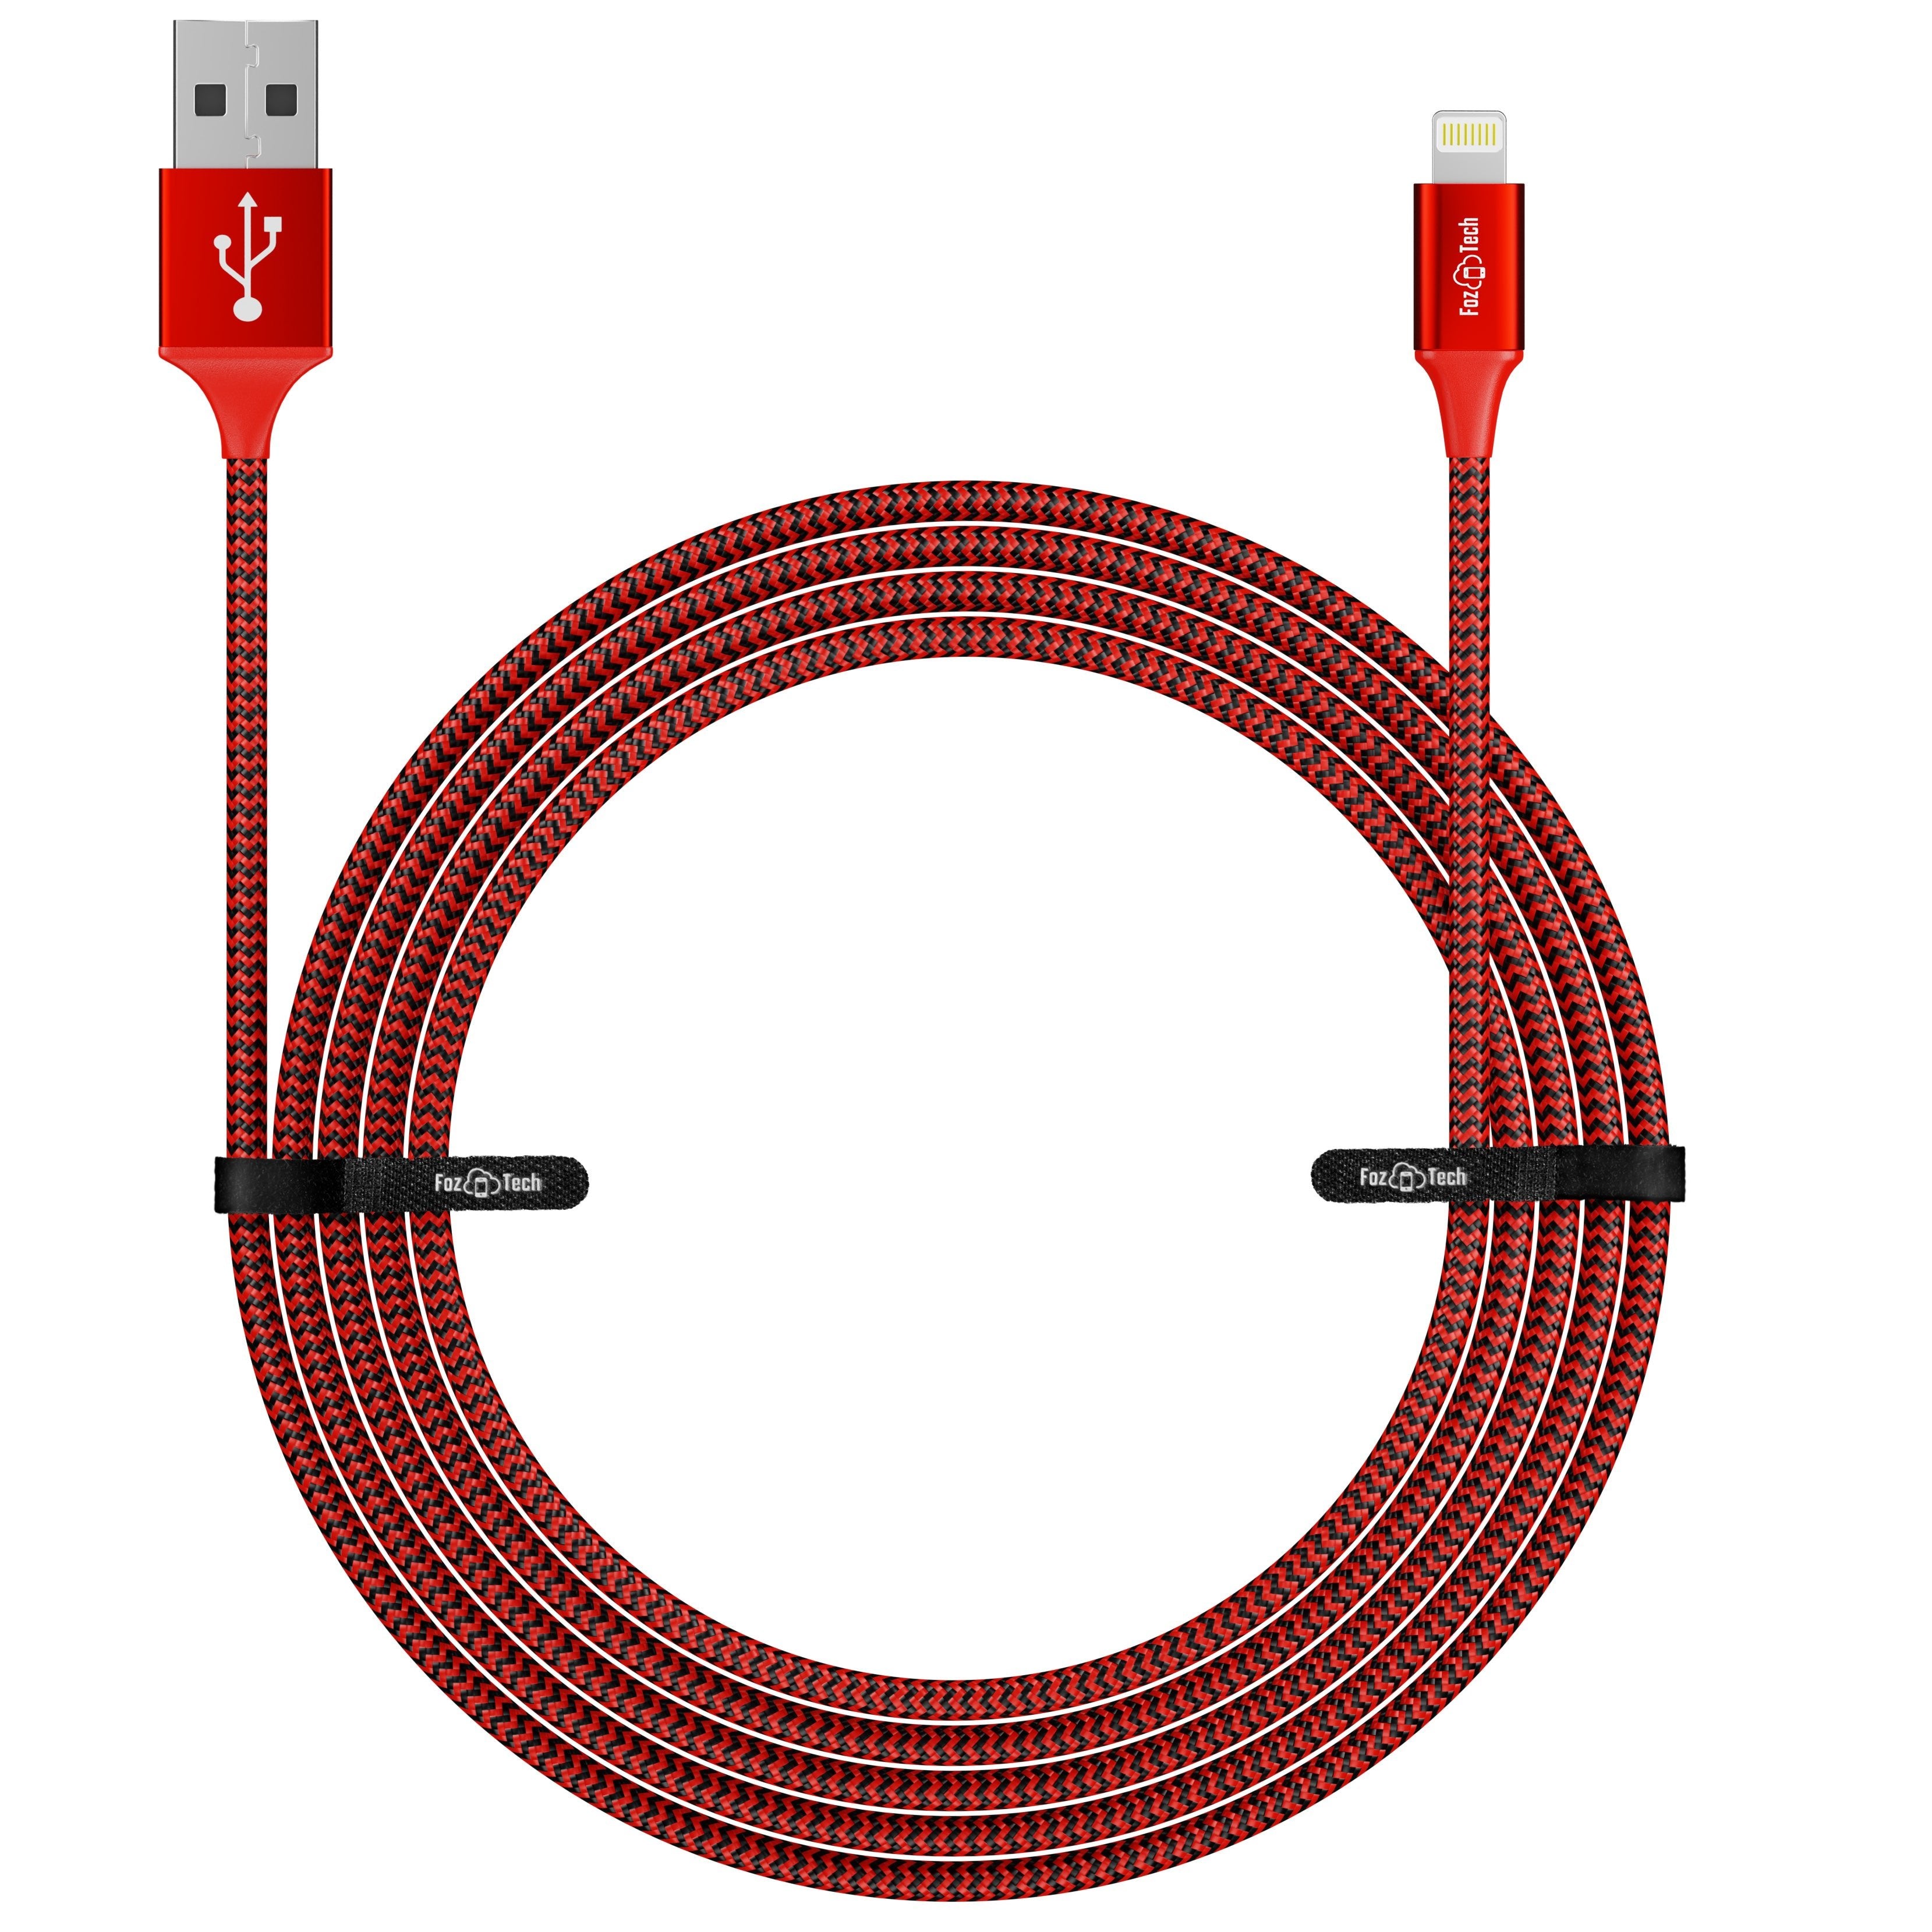 FozTech - PRO Series - USB Charger Cable Data Sync Lead for iPhone, iPad, iPod - Red - USB Cable - FozTech